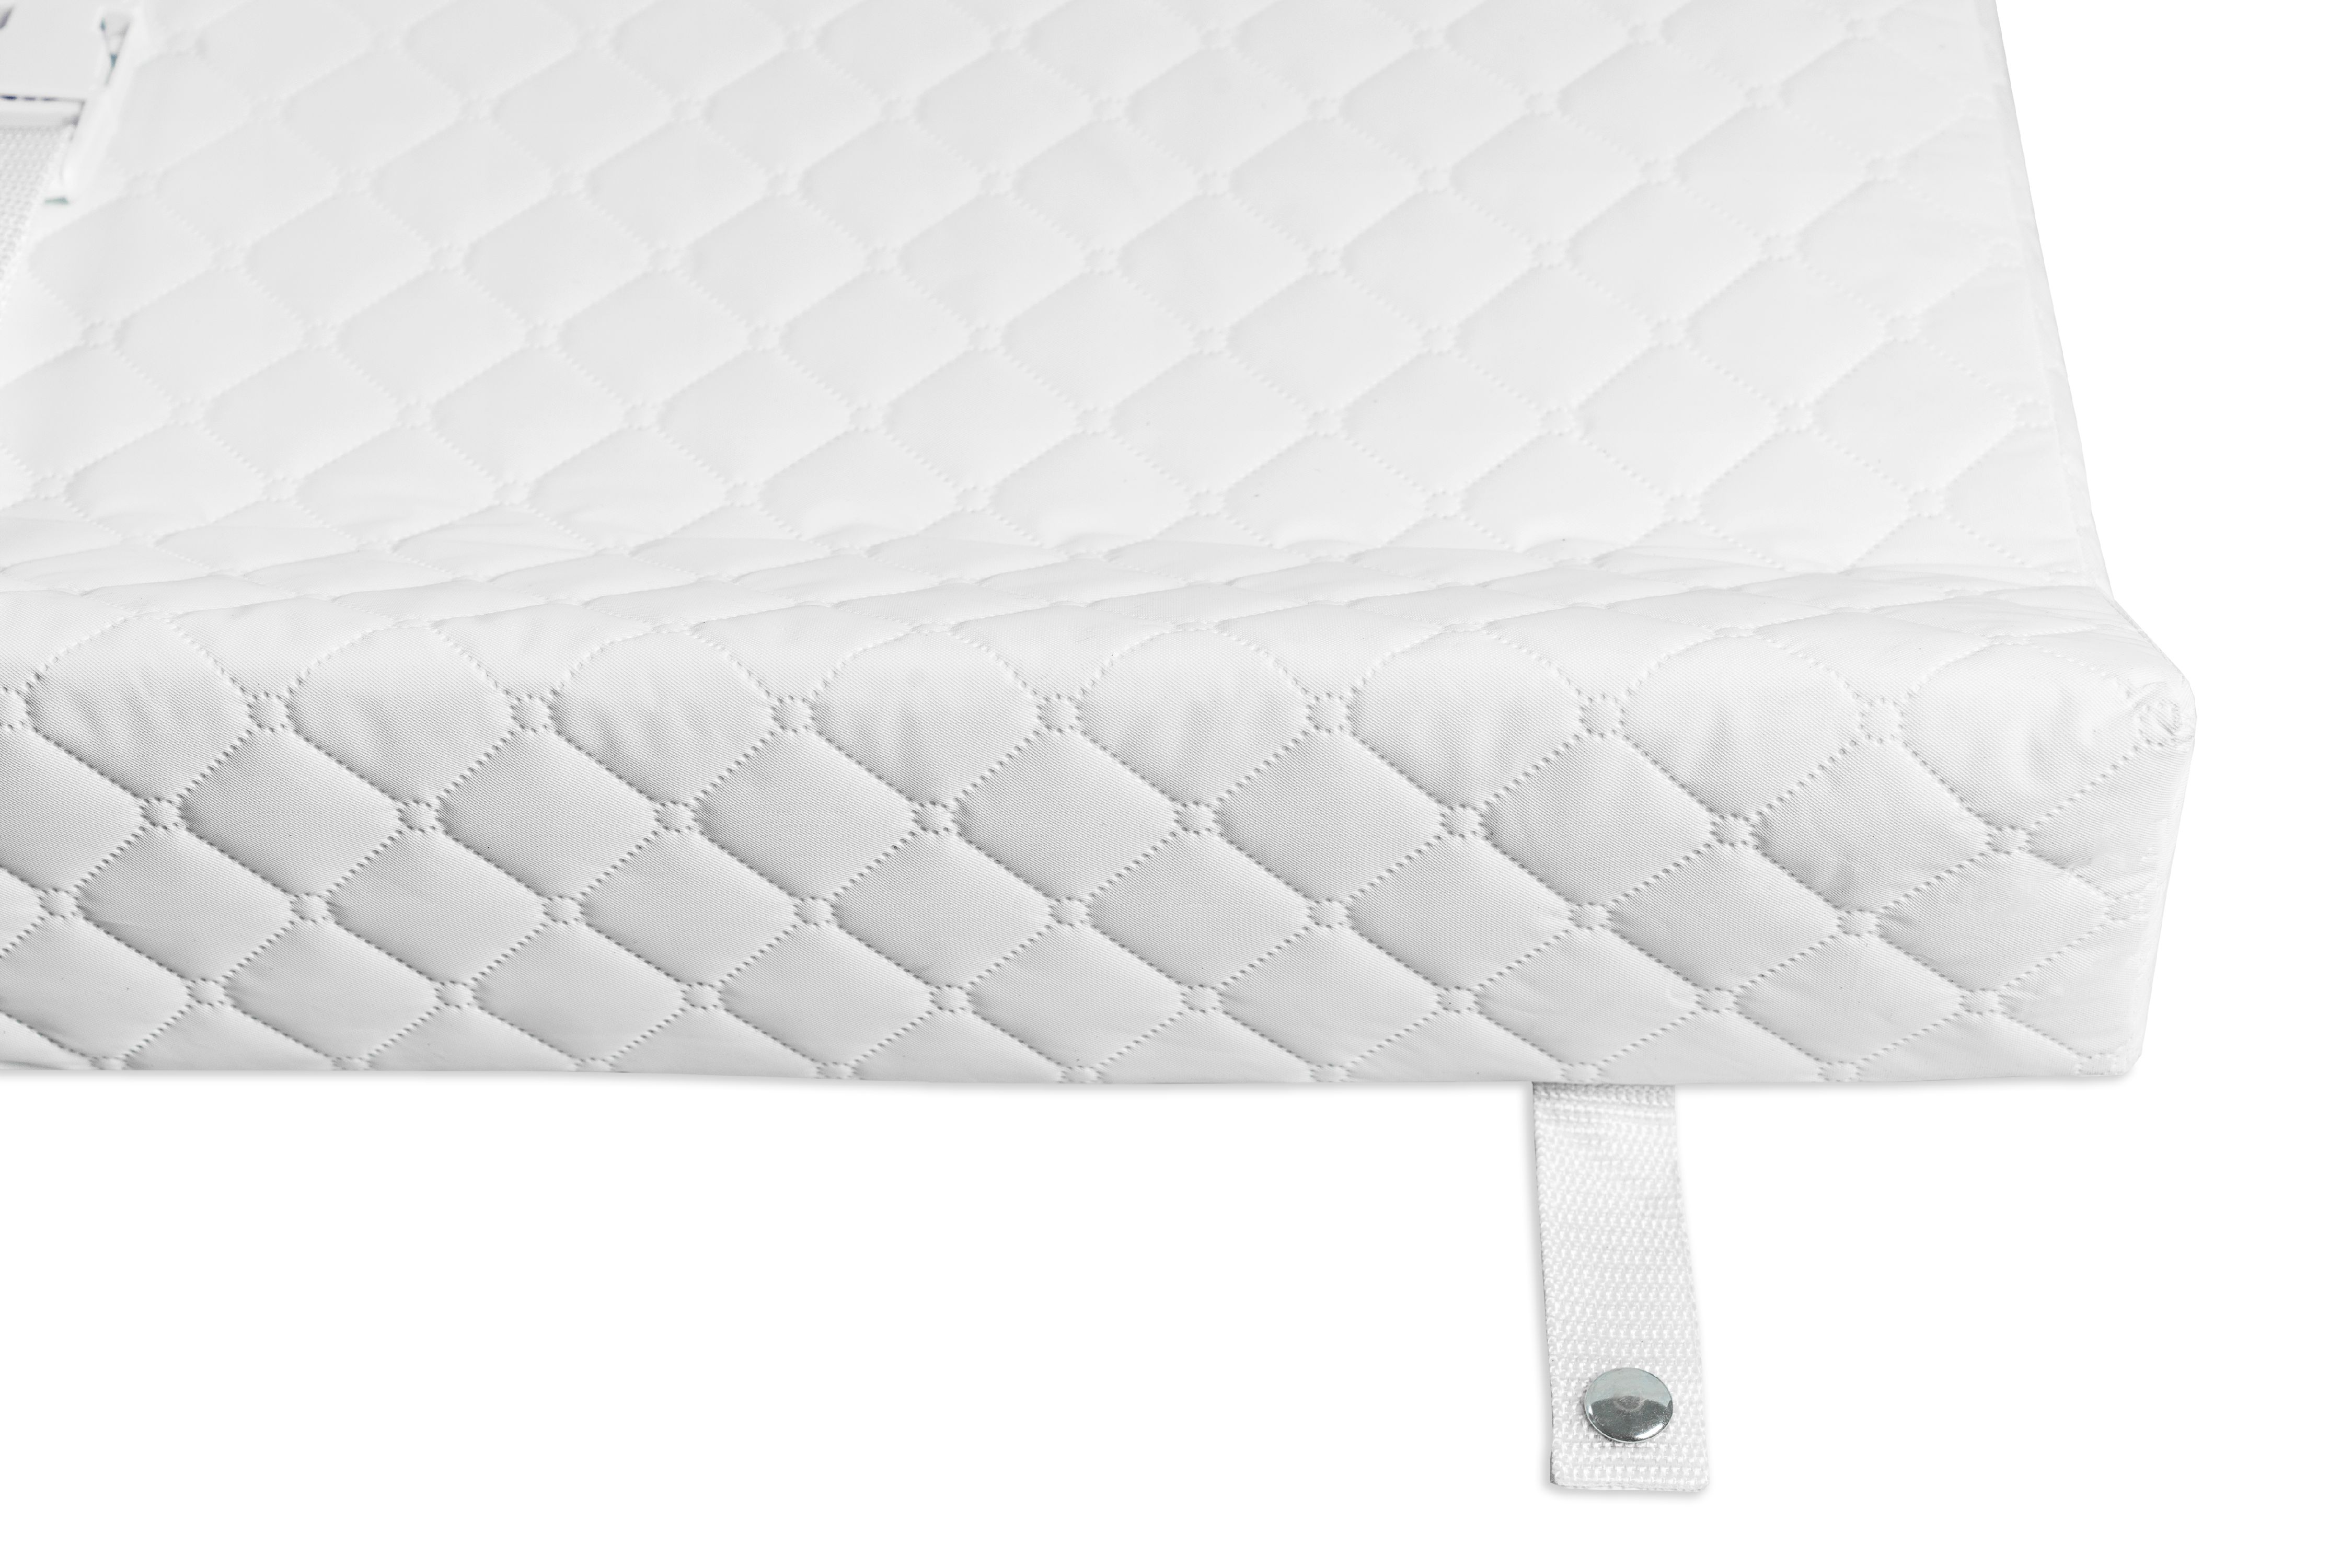 DaVinci 31" Contour Changing Pad for Changer Tray - image 4 of 5